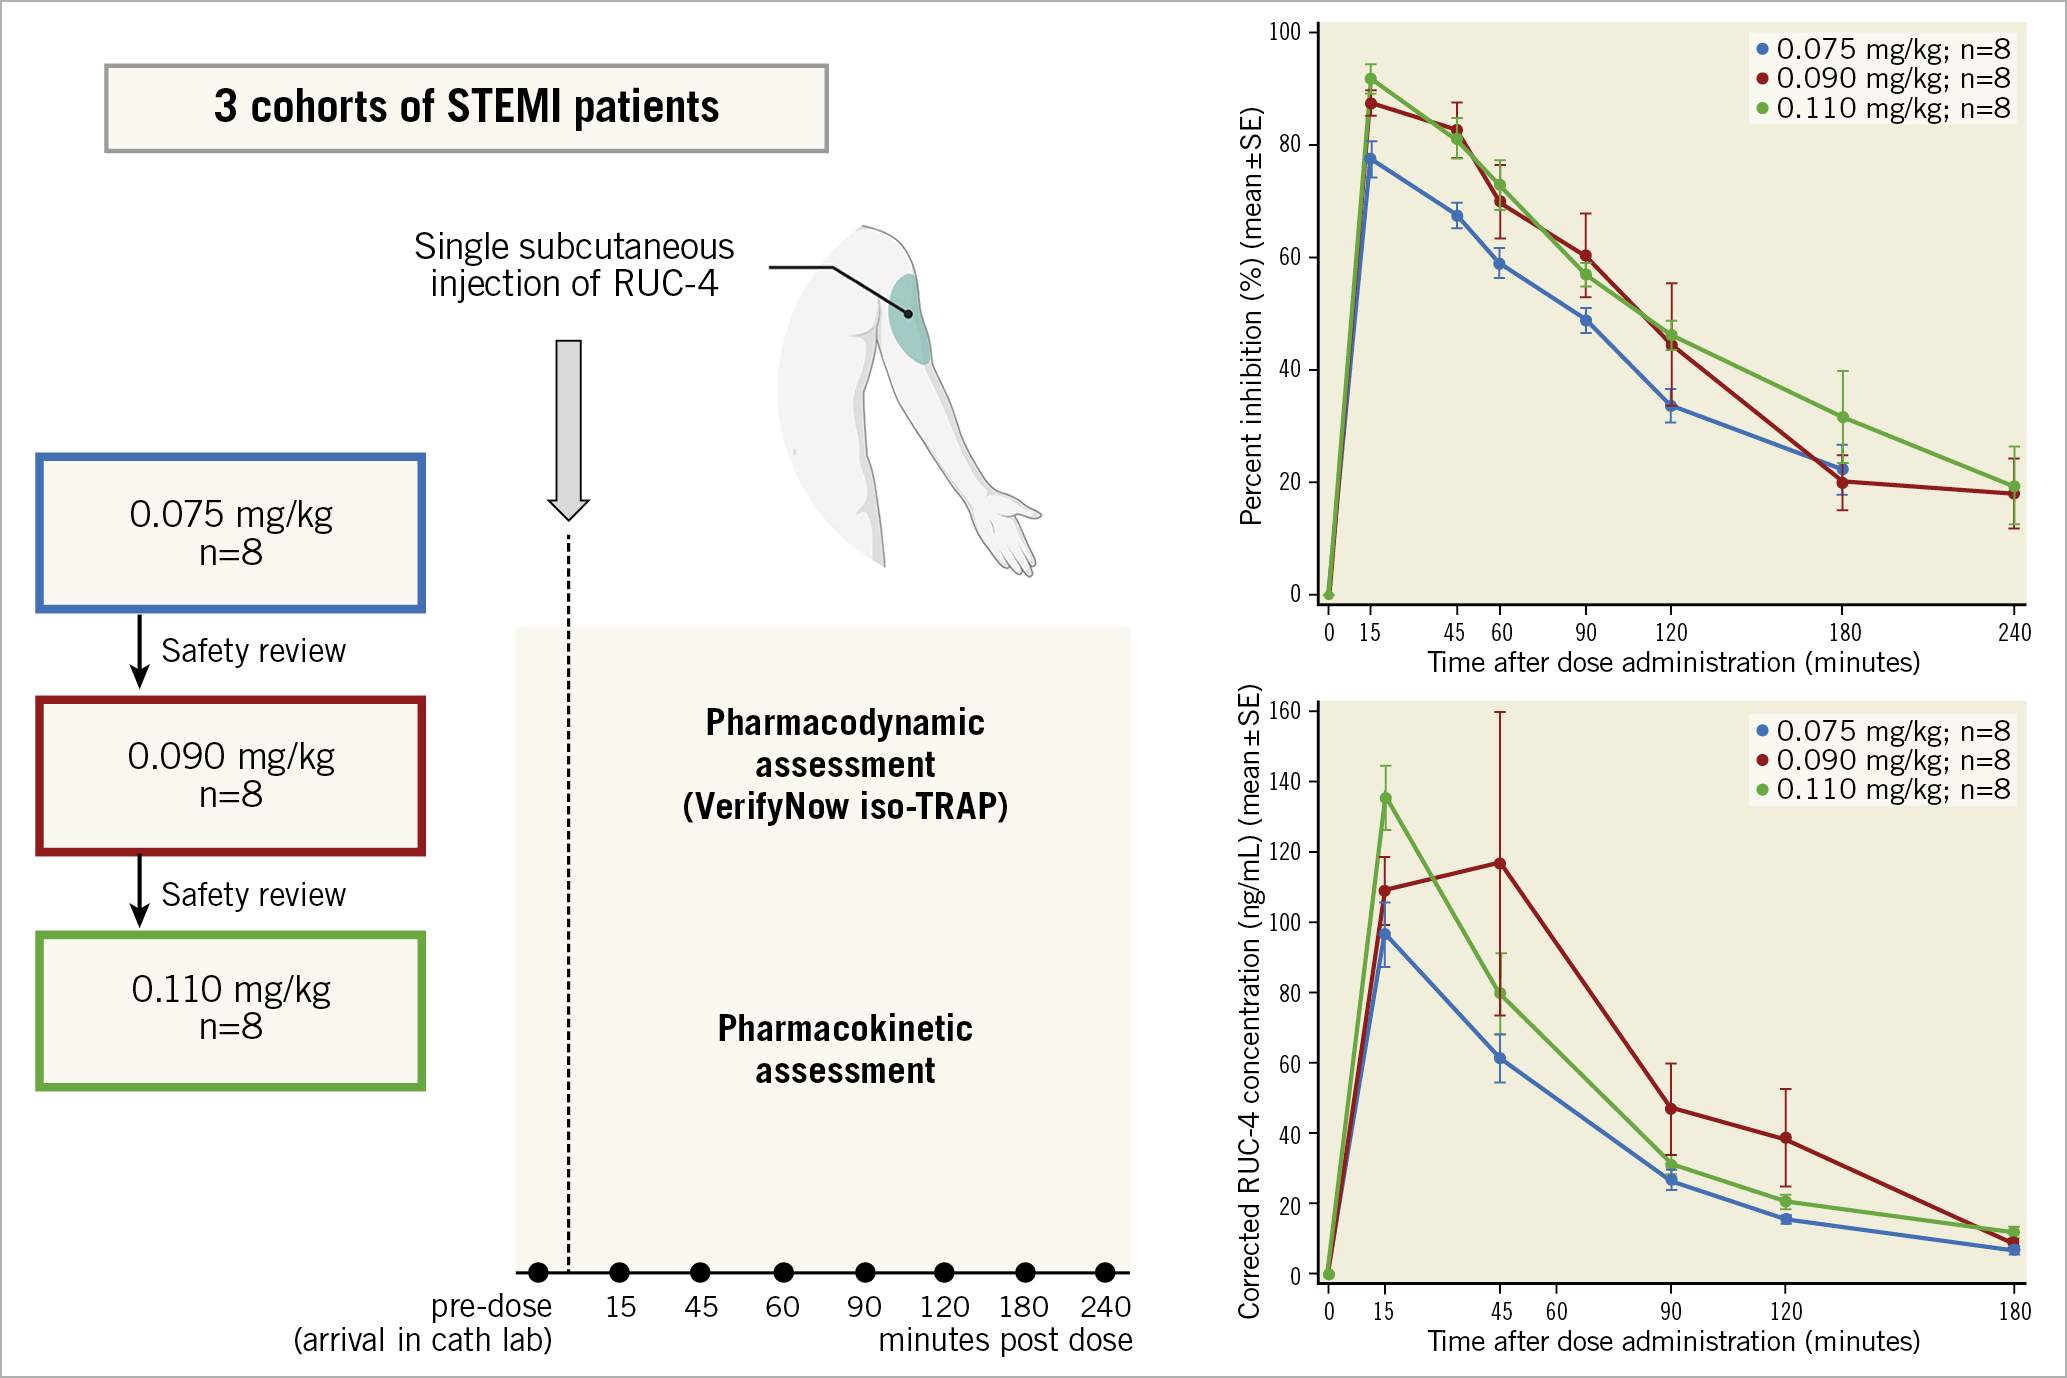 Central illustration. Single-dose subcutaneous RUC-4 induces a fast, potent, dose-dependent platelet inhibition in STEMI patients presenting for primary PCI. PCI: percutaneous coronary intervention; STEMI: ST-segment elevation myocardial infarction; TRAP: thrombin receptor activating peptide